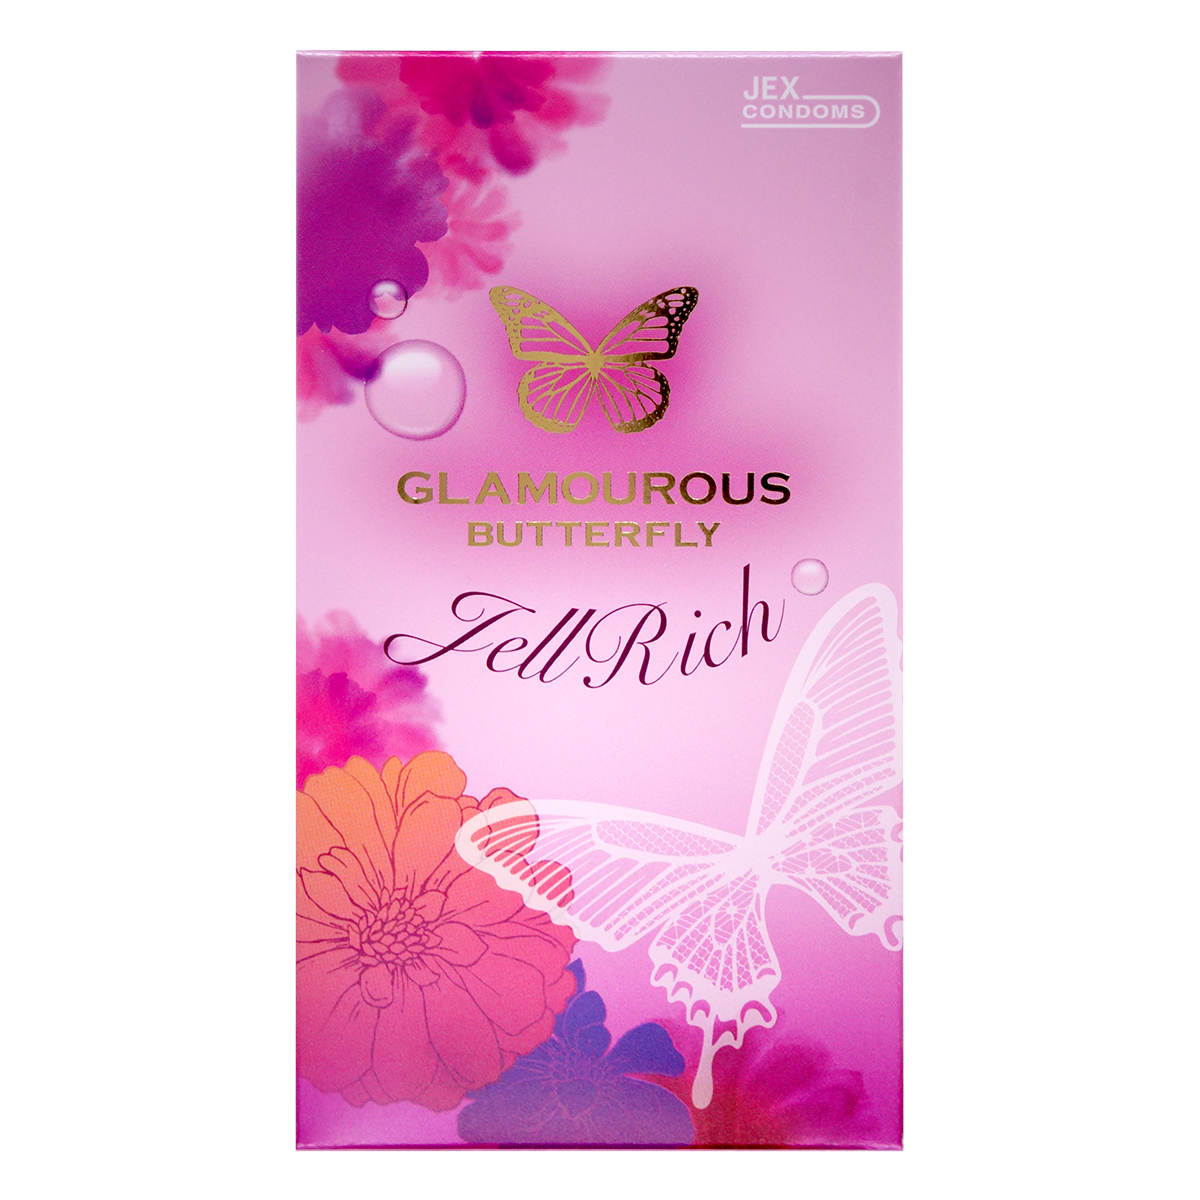 Glamourous Butterfly Jell Rich 8's Pack Latex Condom-p_2